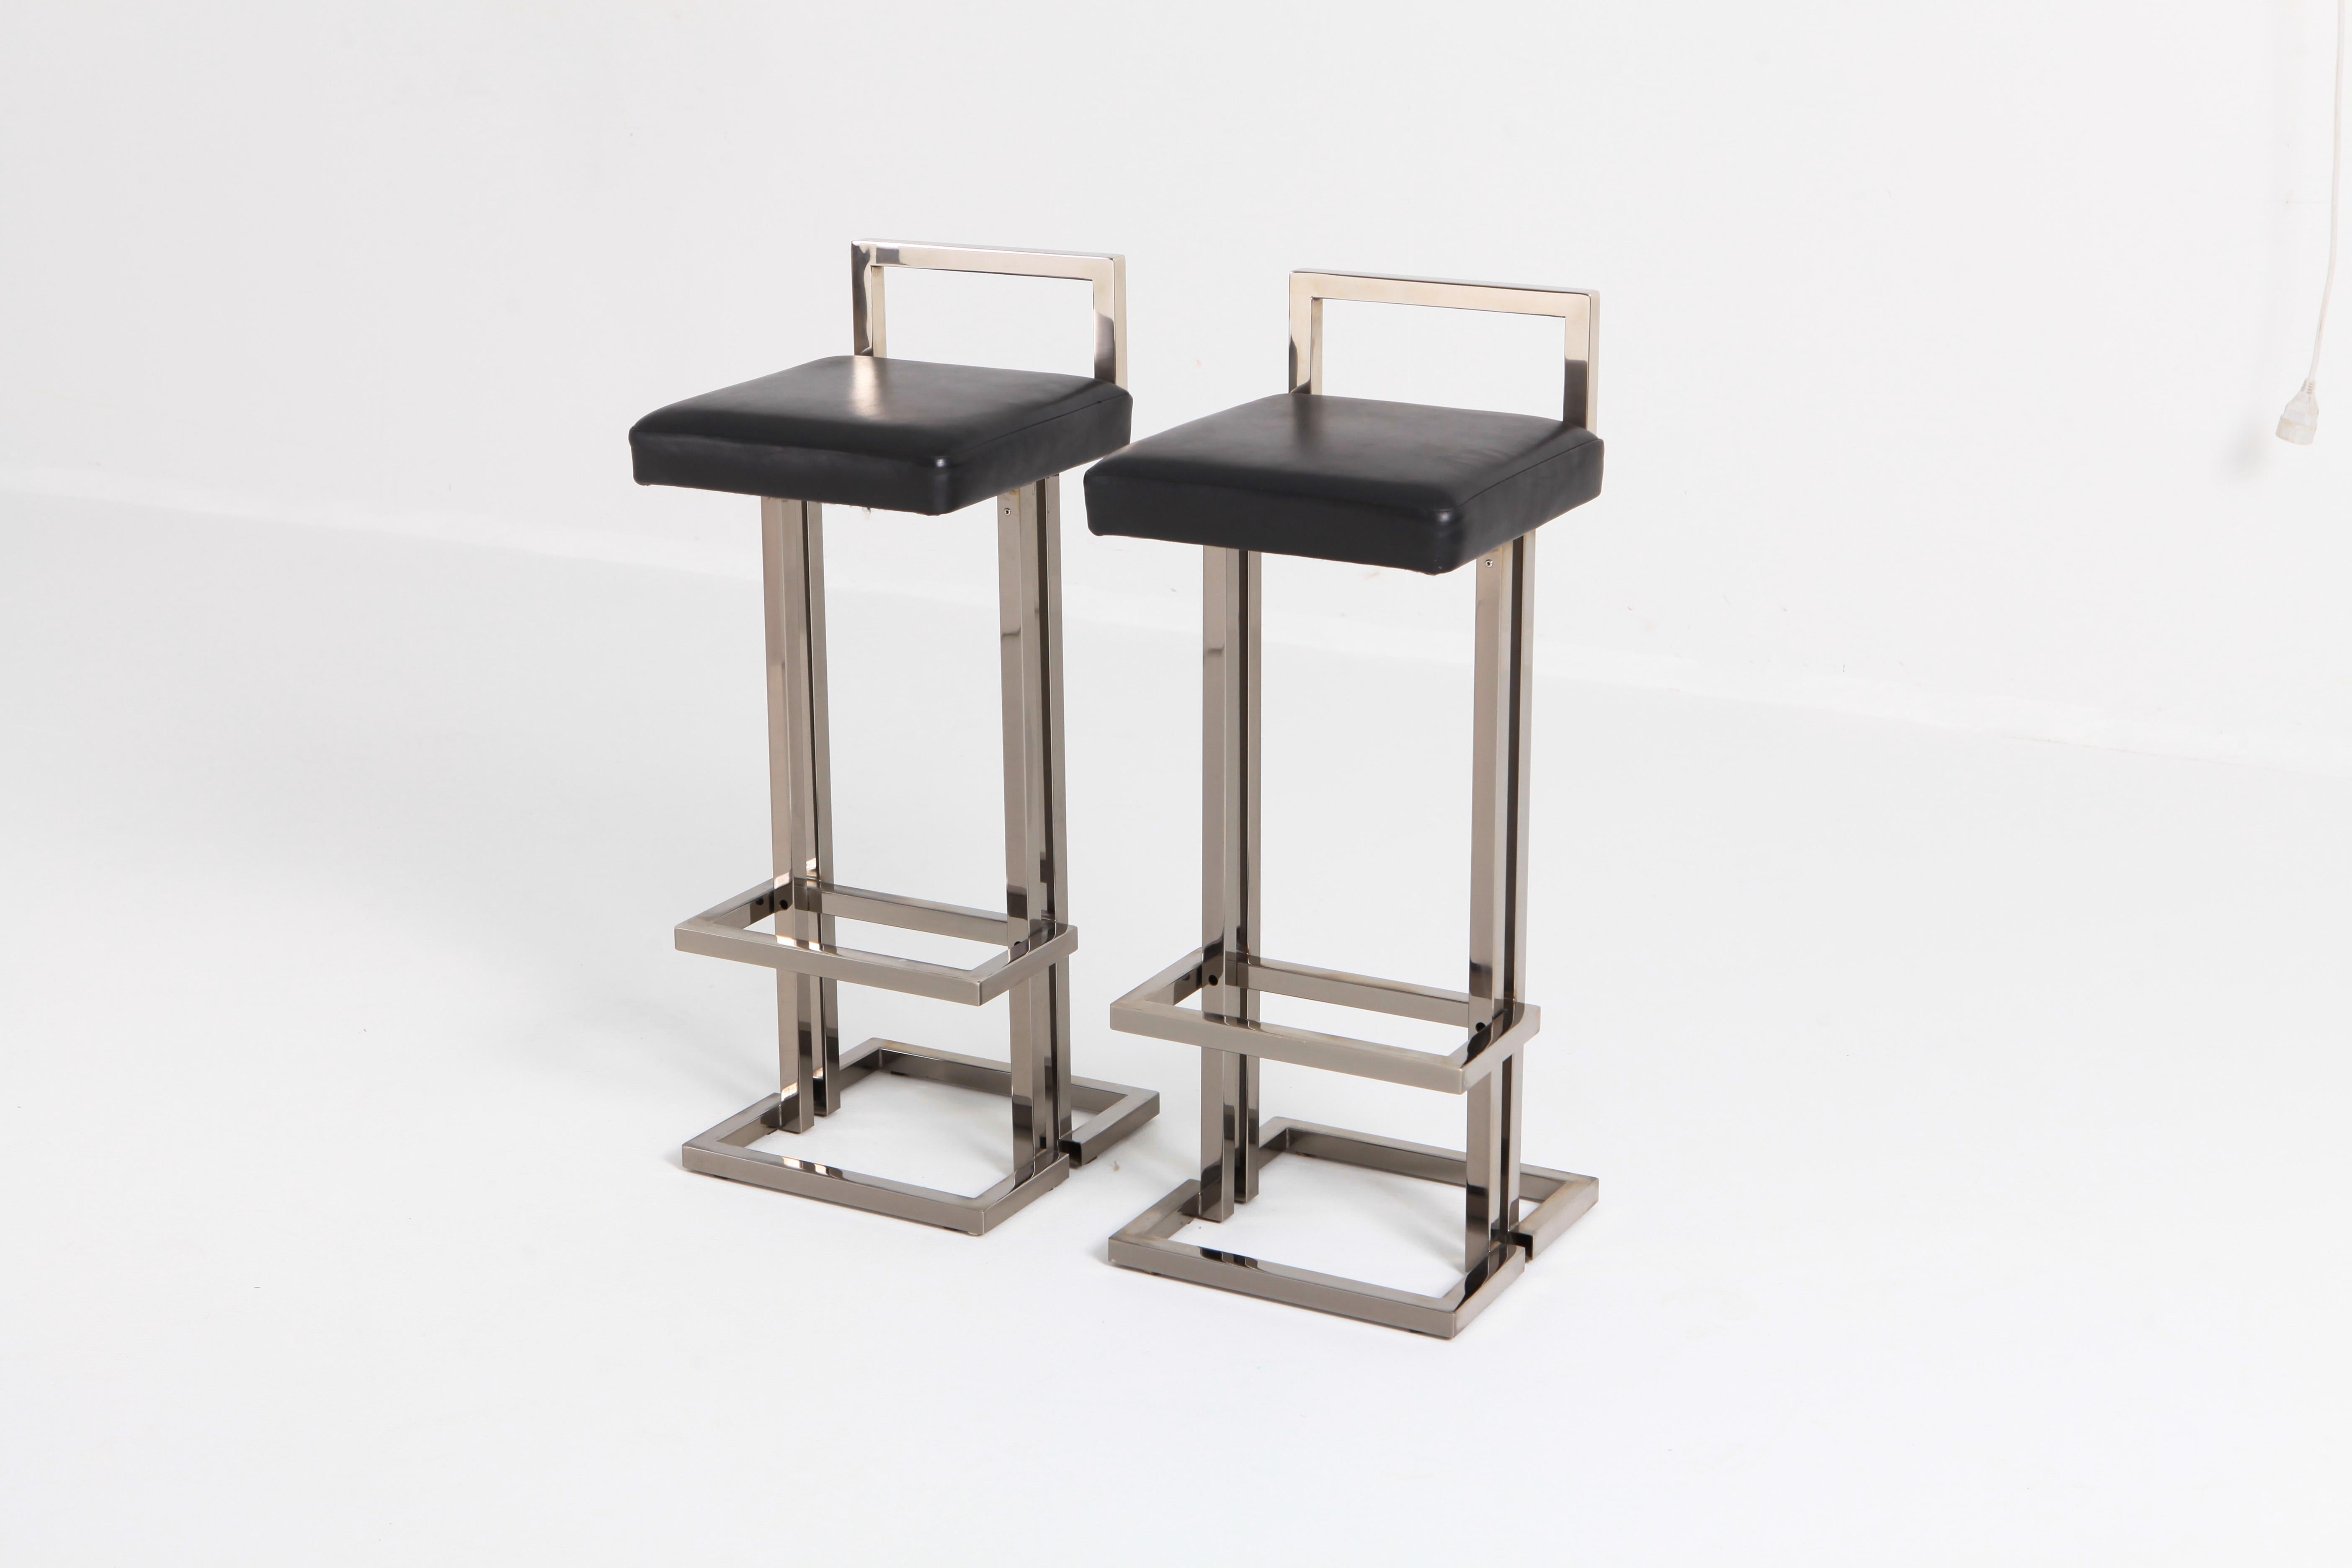 Chrome pair of bar stools by Maison Jansen

France, 1980s

Chrome frame and black leather seats, in very good condition.